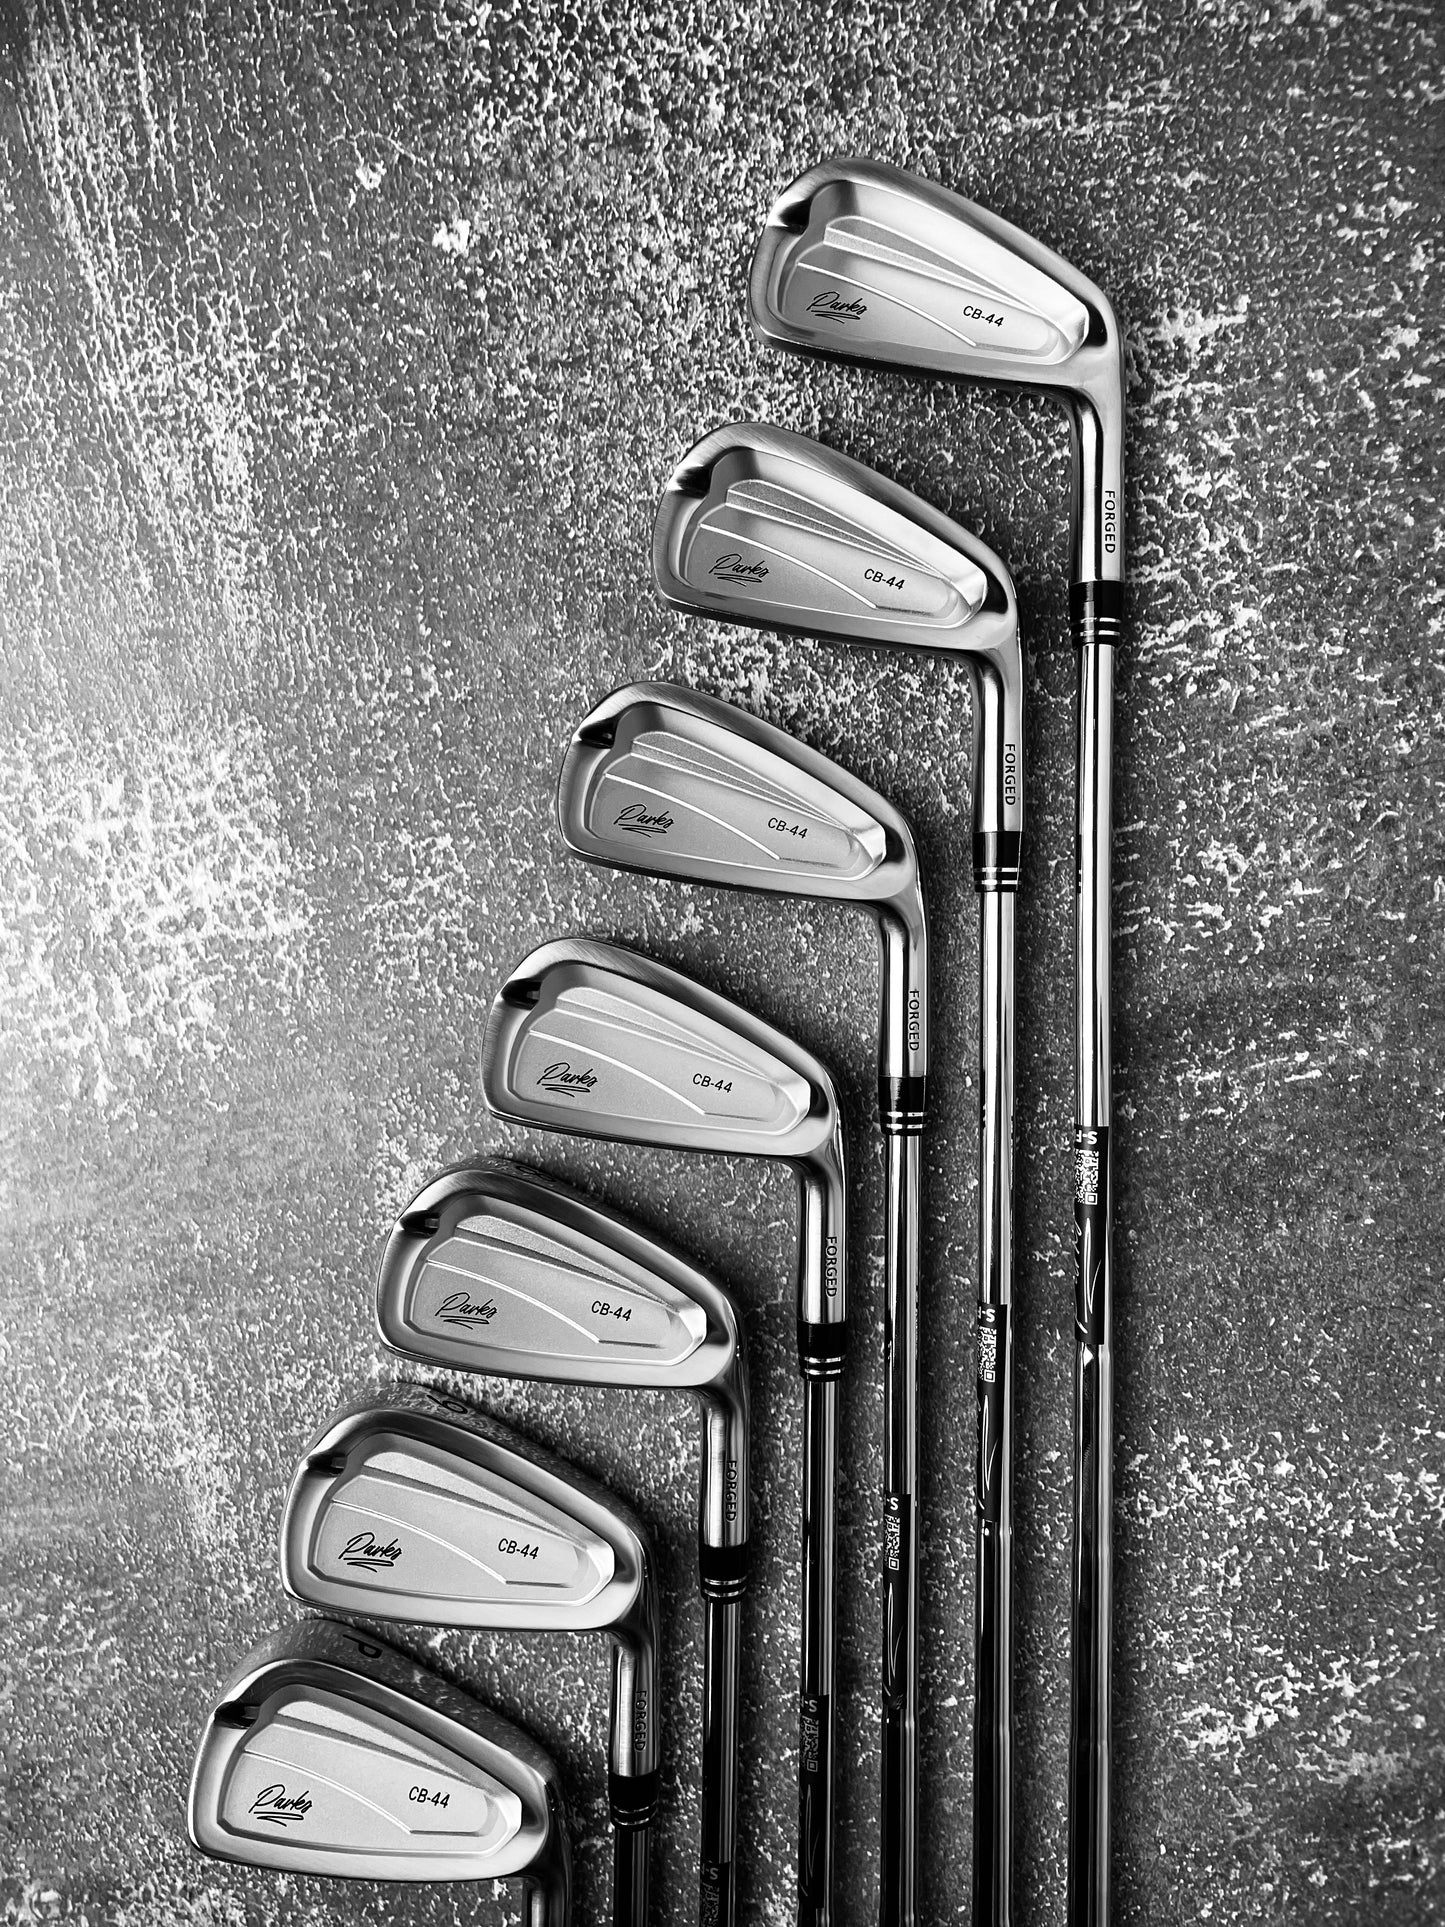 CB-44 Forged Irons